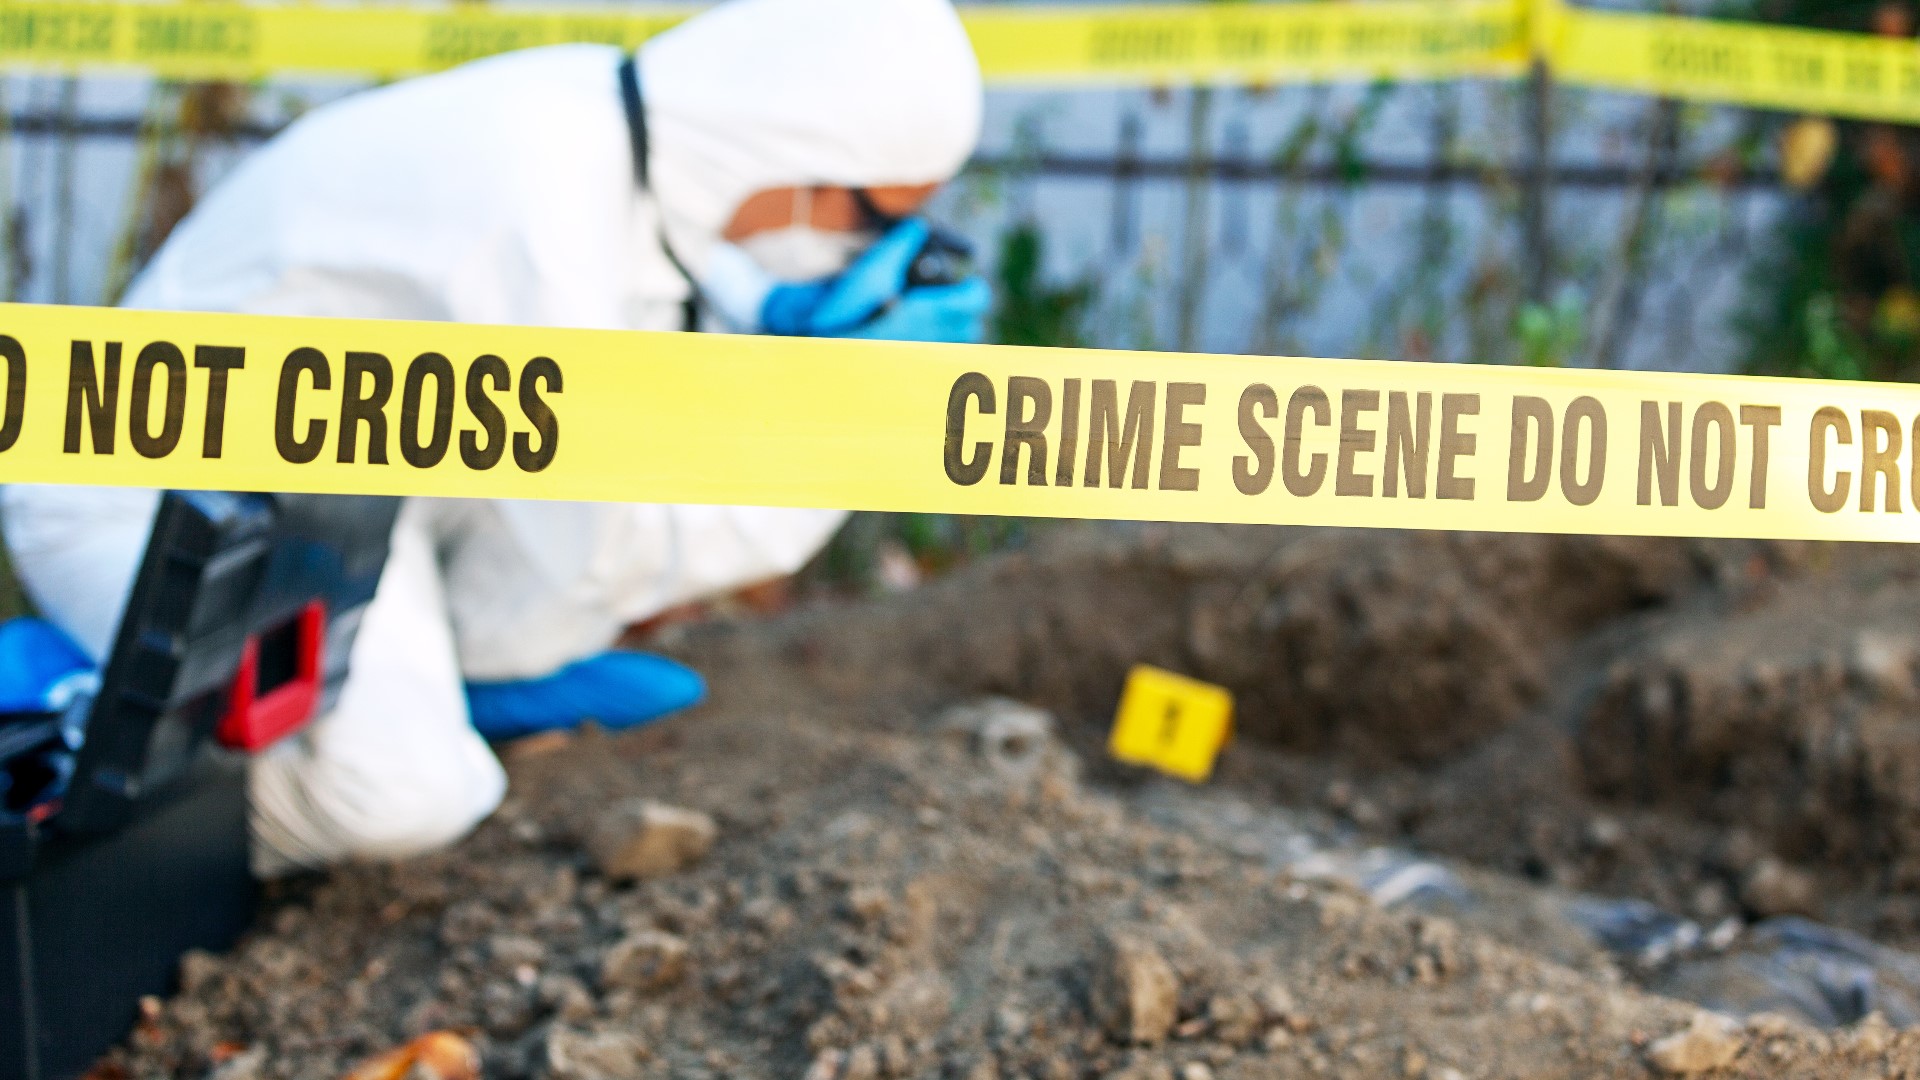 Forensic genetic genealogy could help solve mysteries involving missing people and unidentified remains.